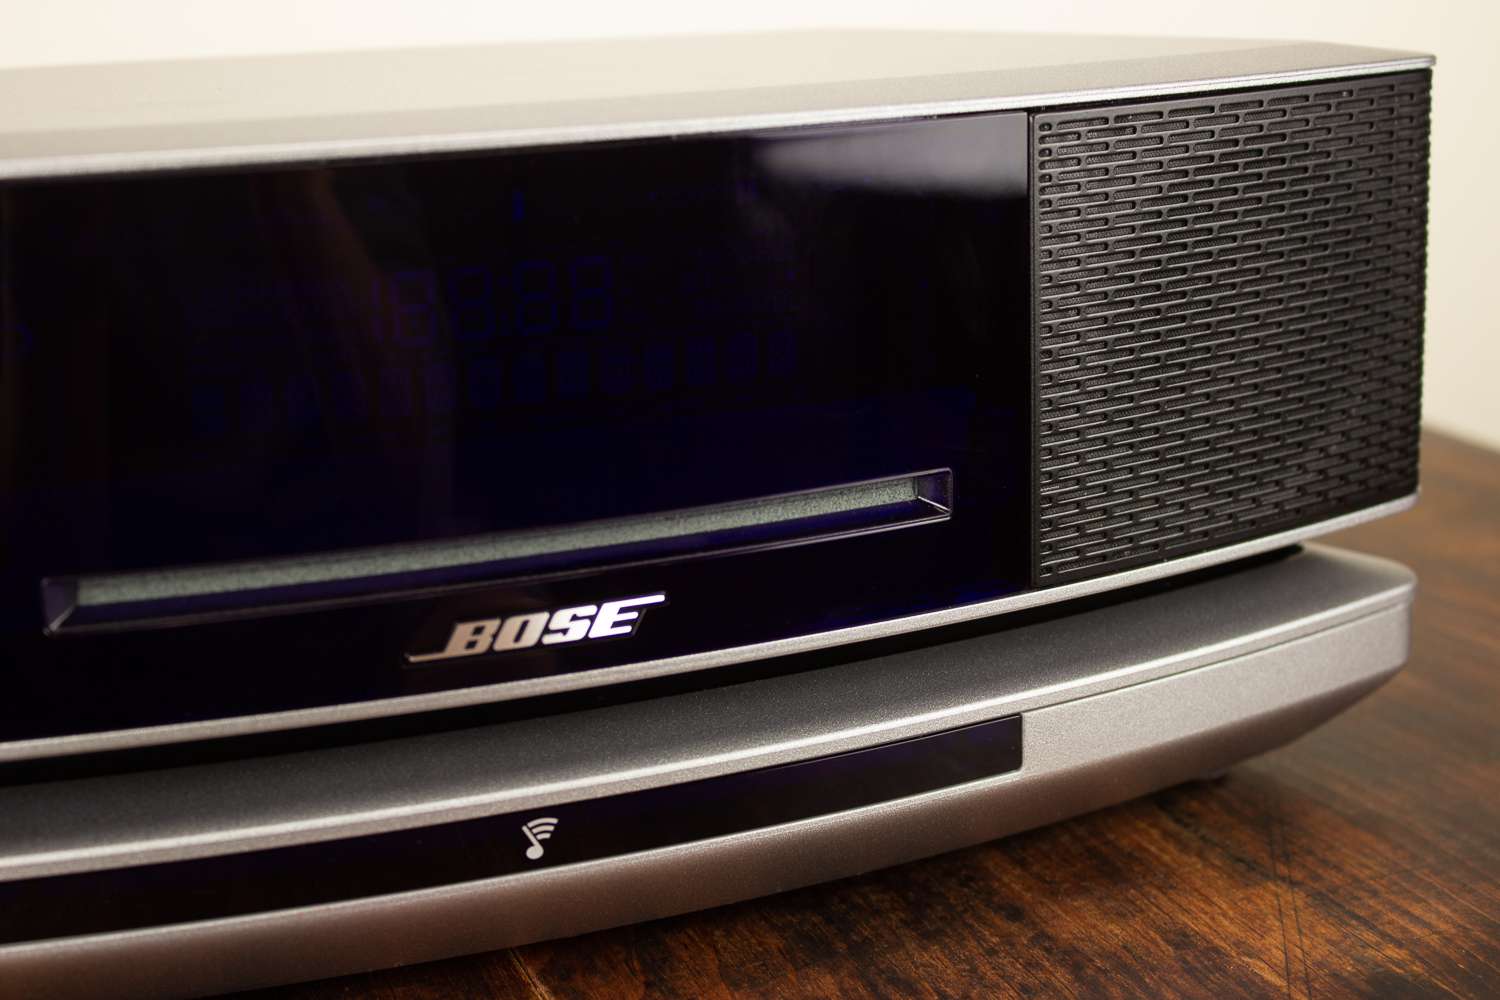 Bose Wave SoundTouch IV Review: Good Audio, Poor Design